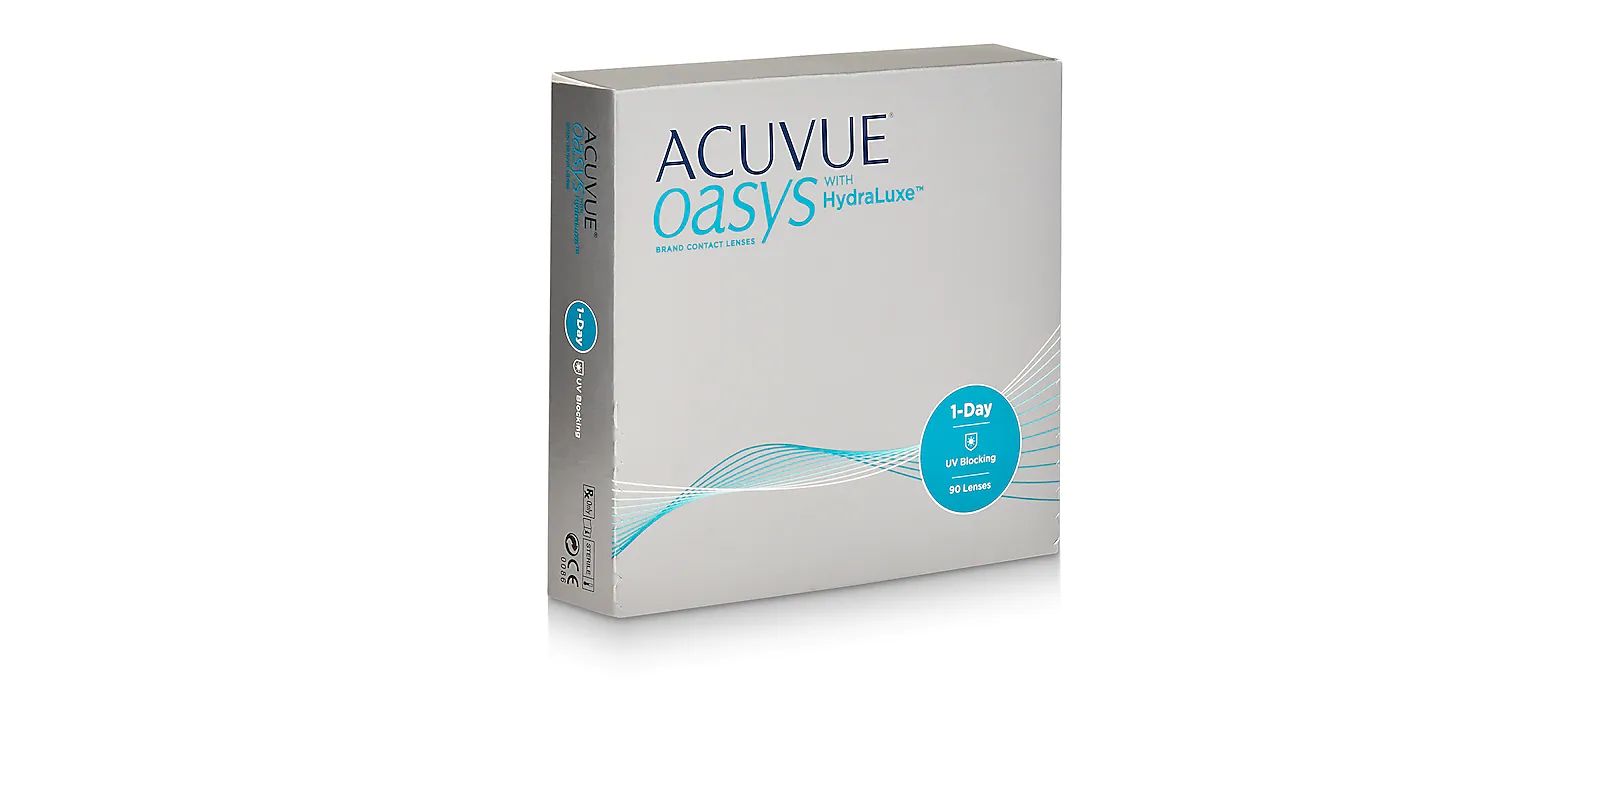 Acuvue Oasys® 1-Day with HydraLuxe™ Technology, 90 pack | ContactsDirect